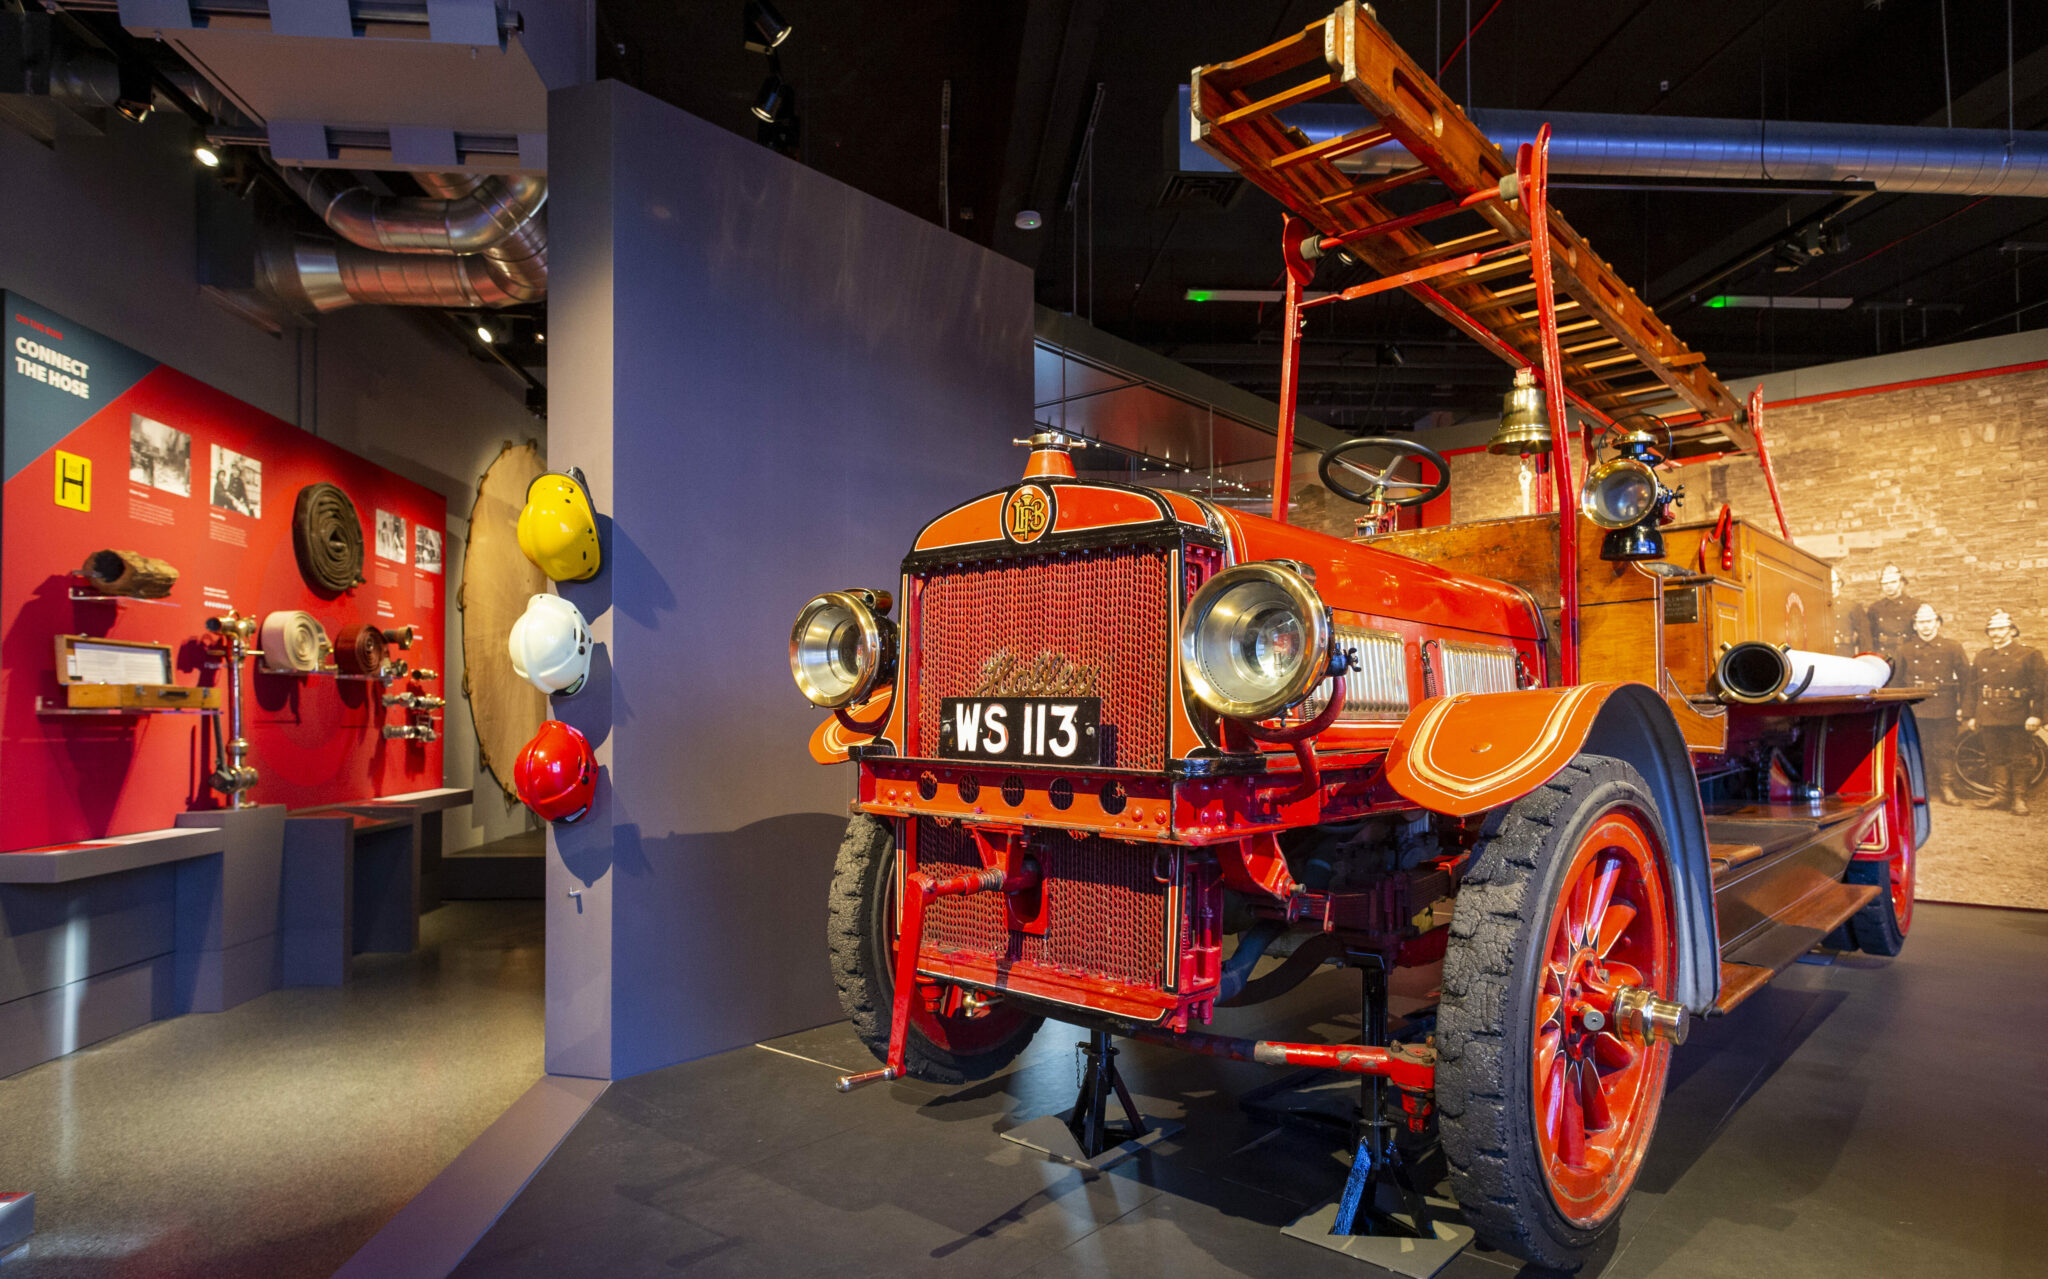 Image showing Museum of Scottish Fire Heritage